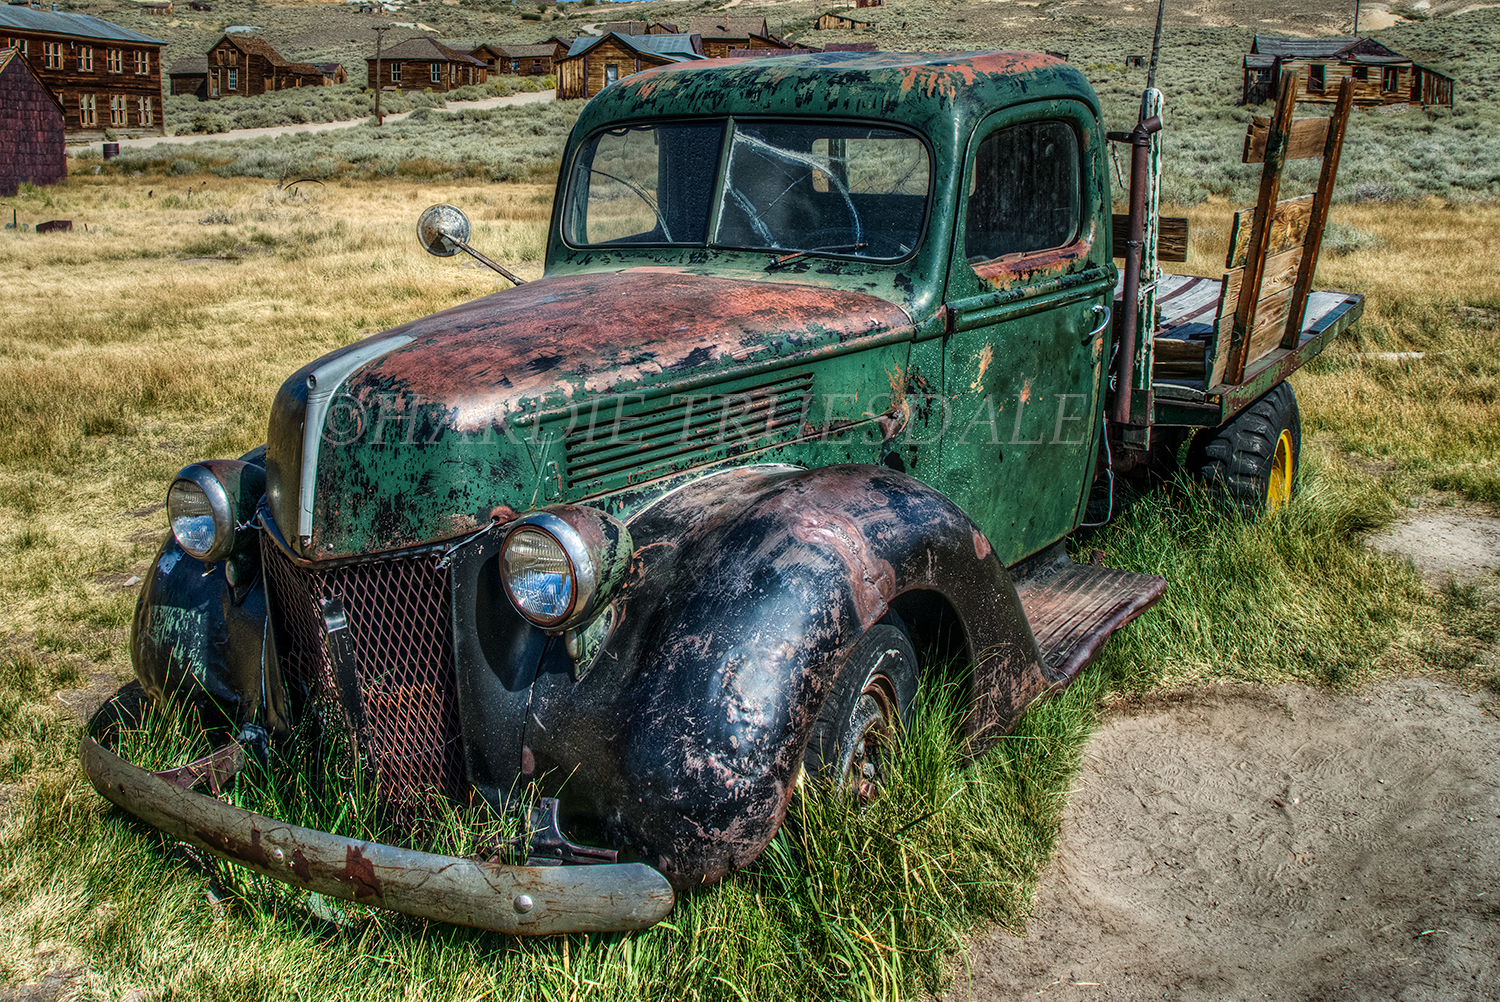 CA#178 "Abandoned, Bodie"